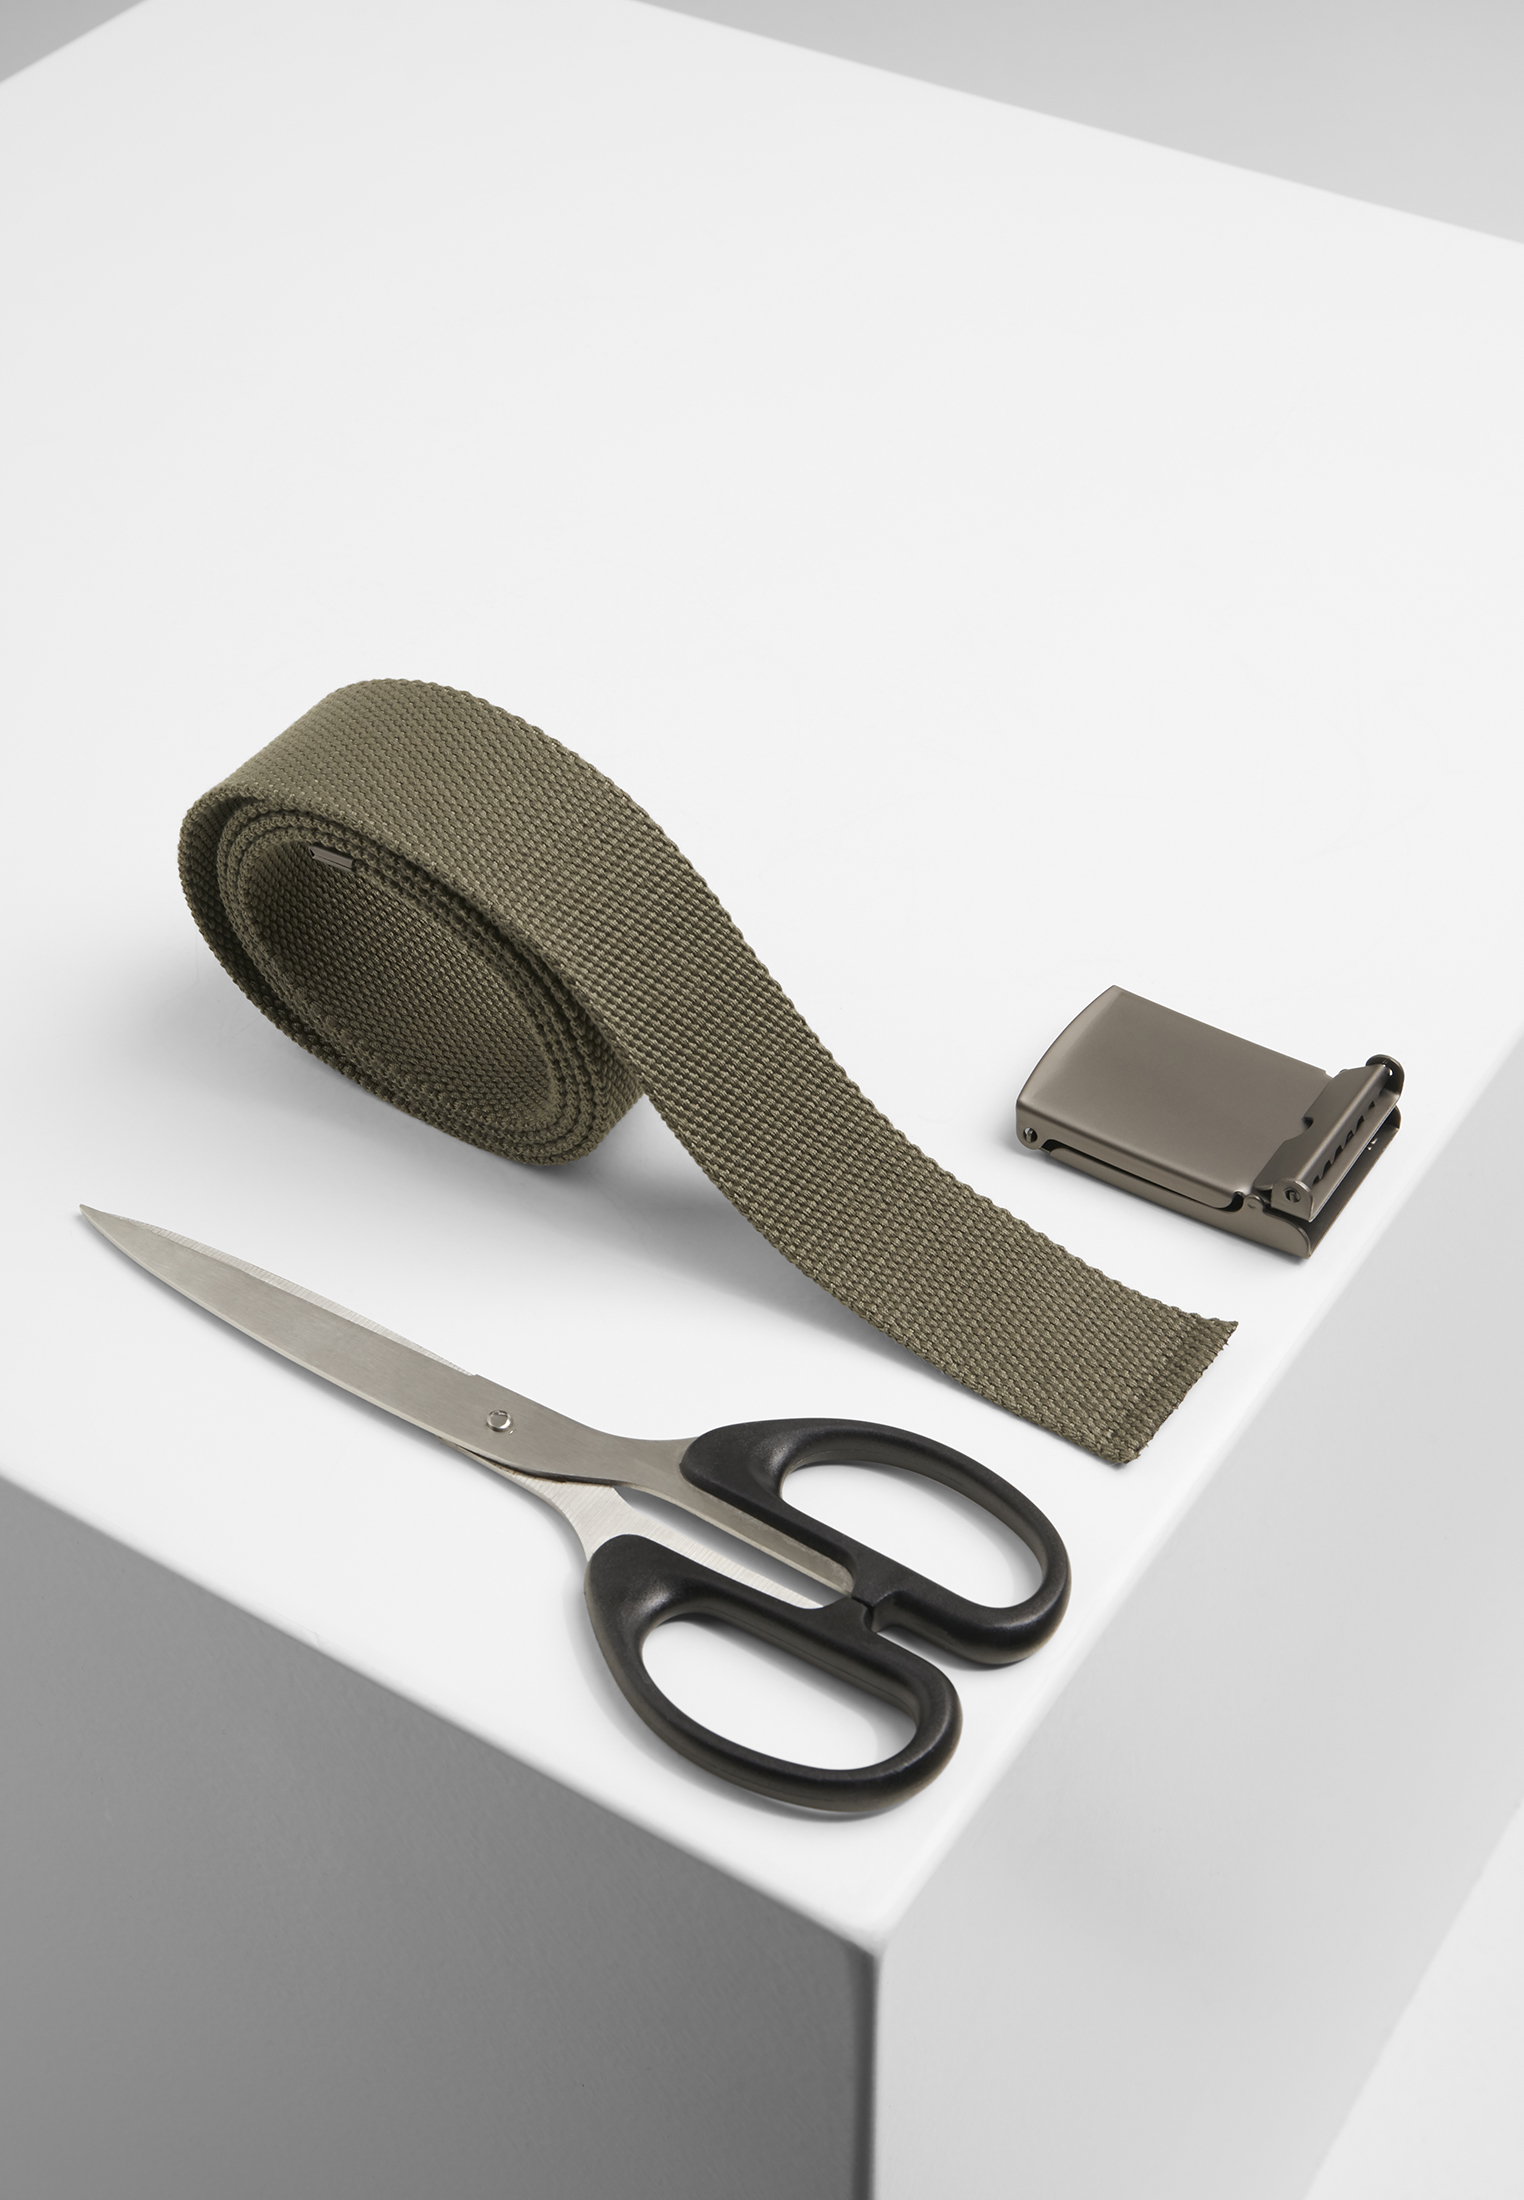 G?rtel Canvas Belts in Farbe olive